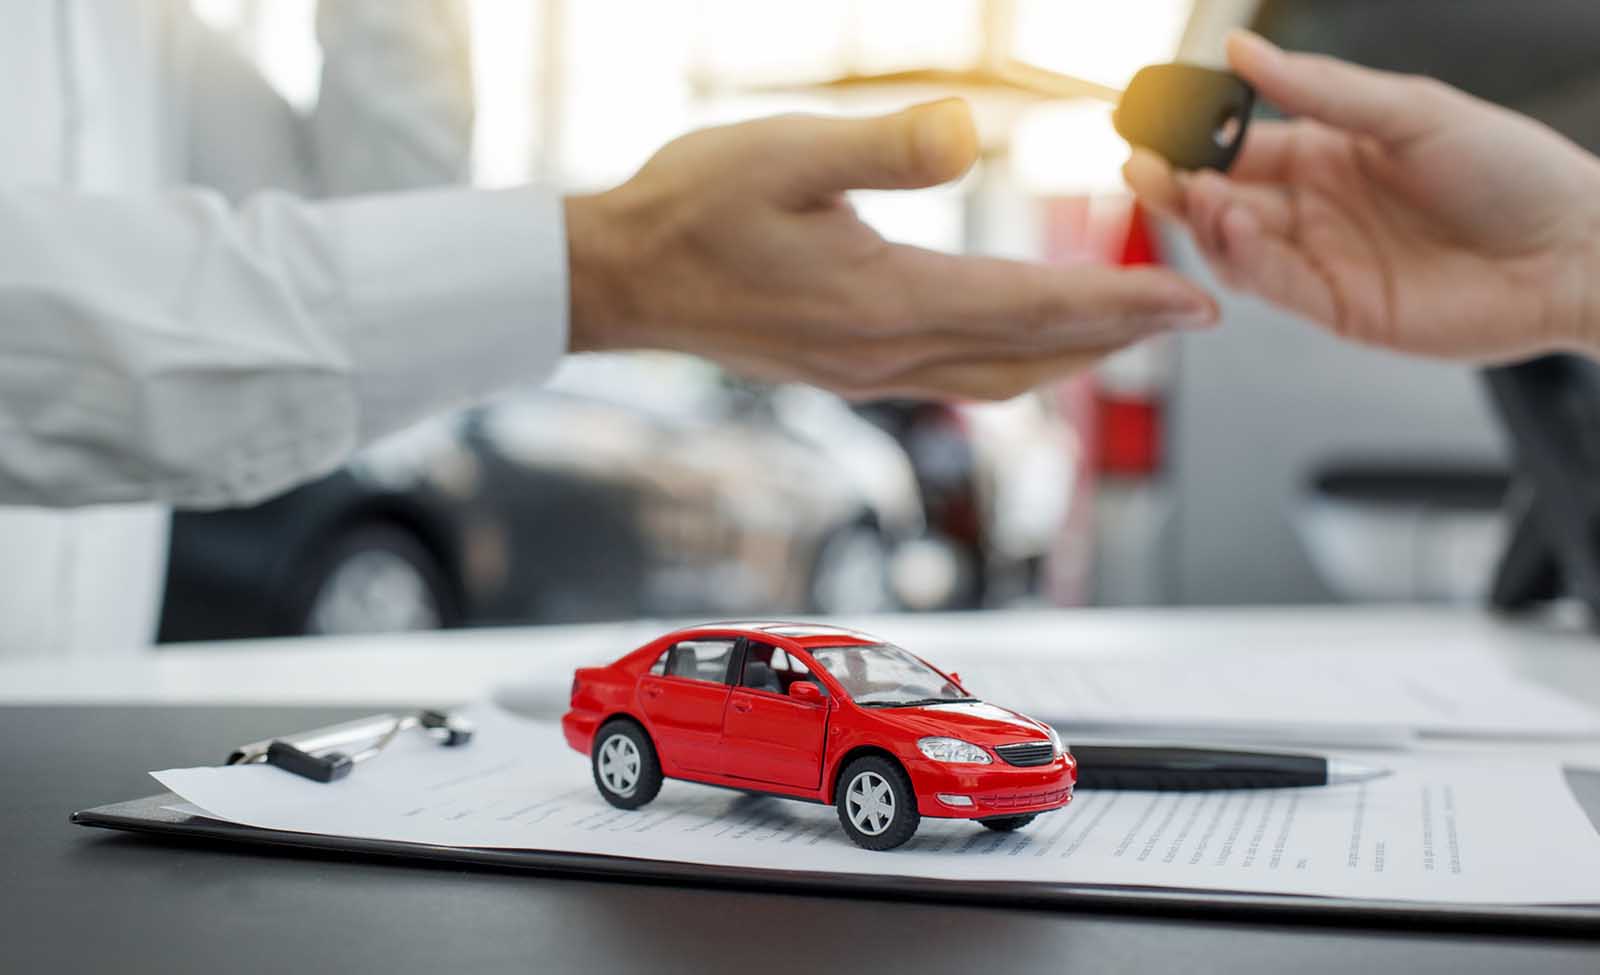 Factors To Take Into Account When Refinancing Your Auto Loan